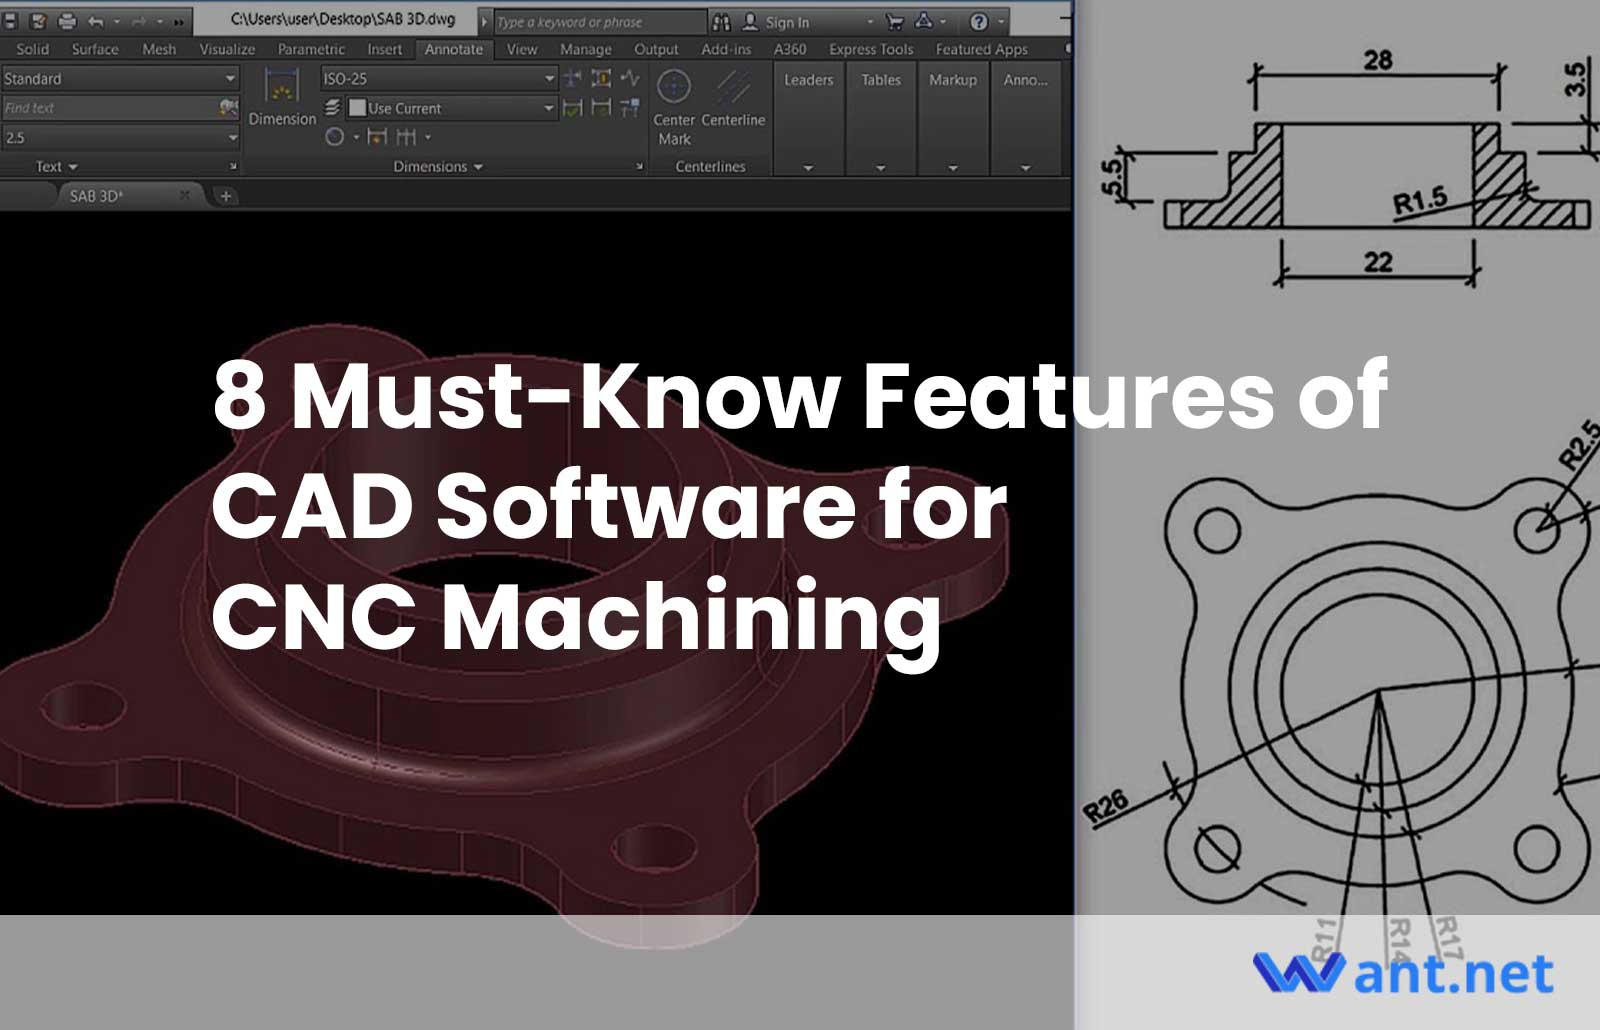 8 Must-Know Features of CAD Software for CNC Machining